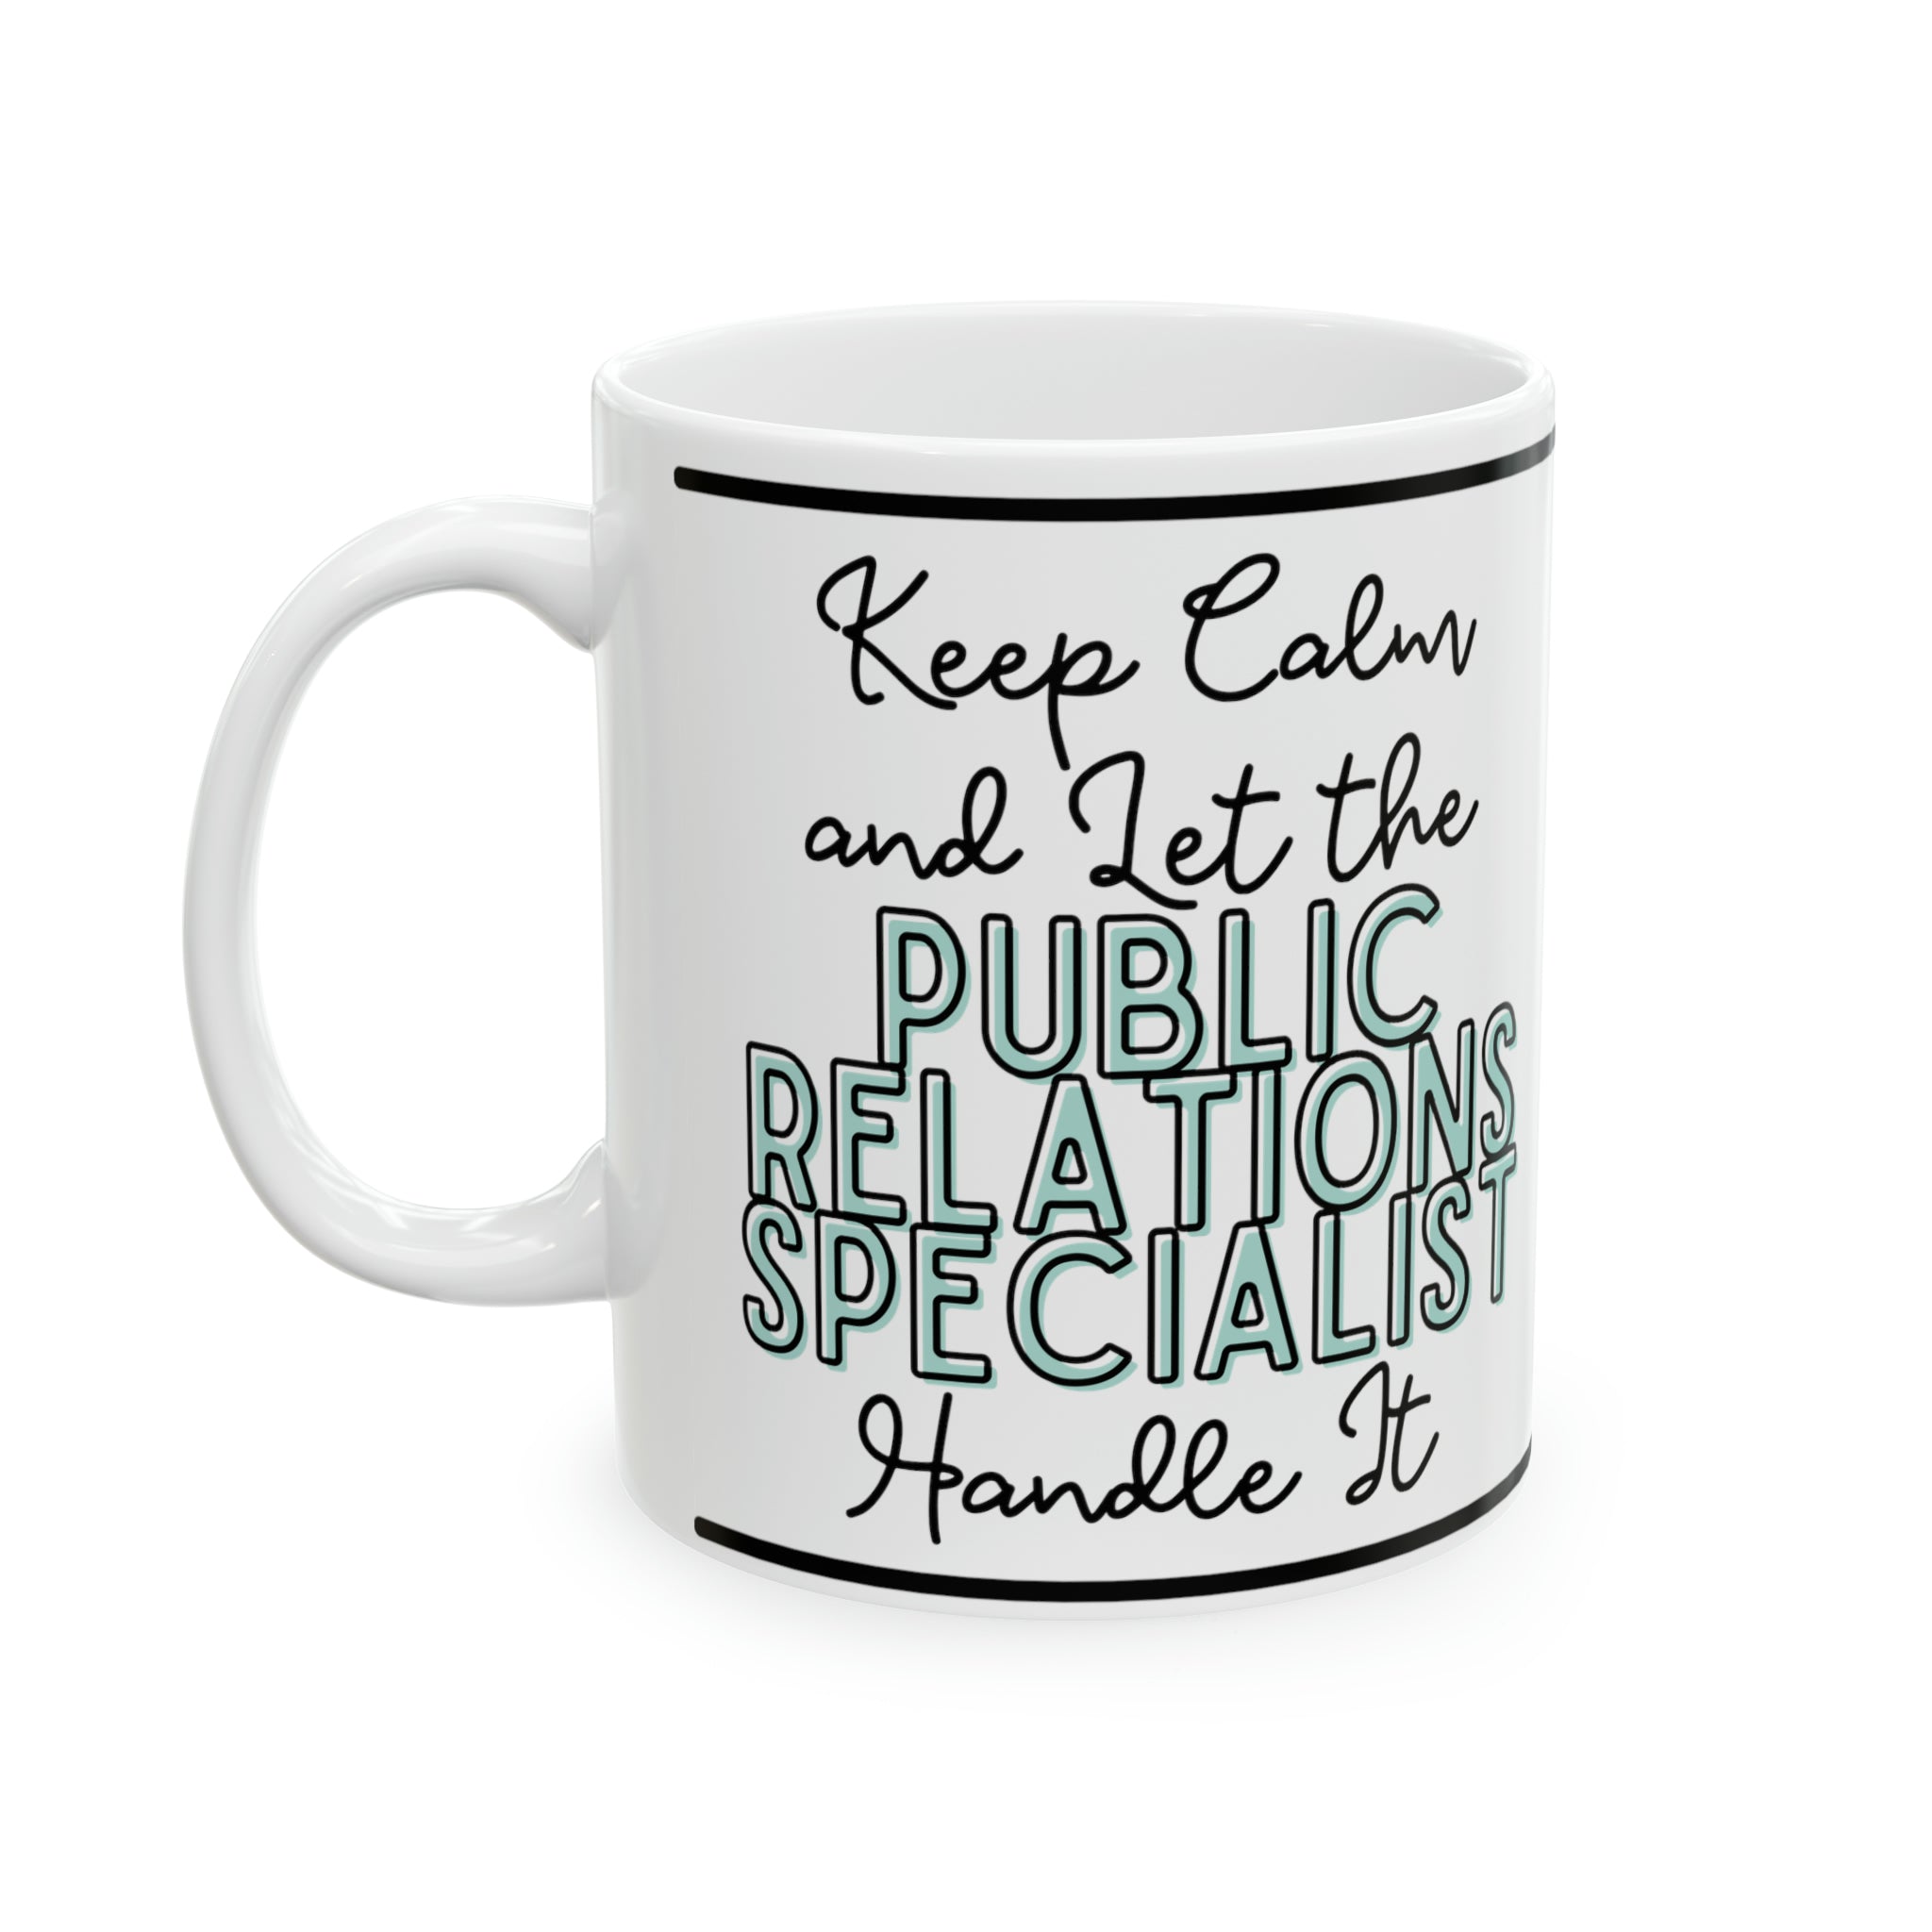 Keep Calm and let the Public Relations Specialist Handle It - Ceramic Mug, 11oz